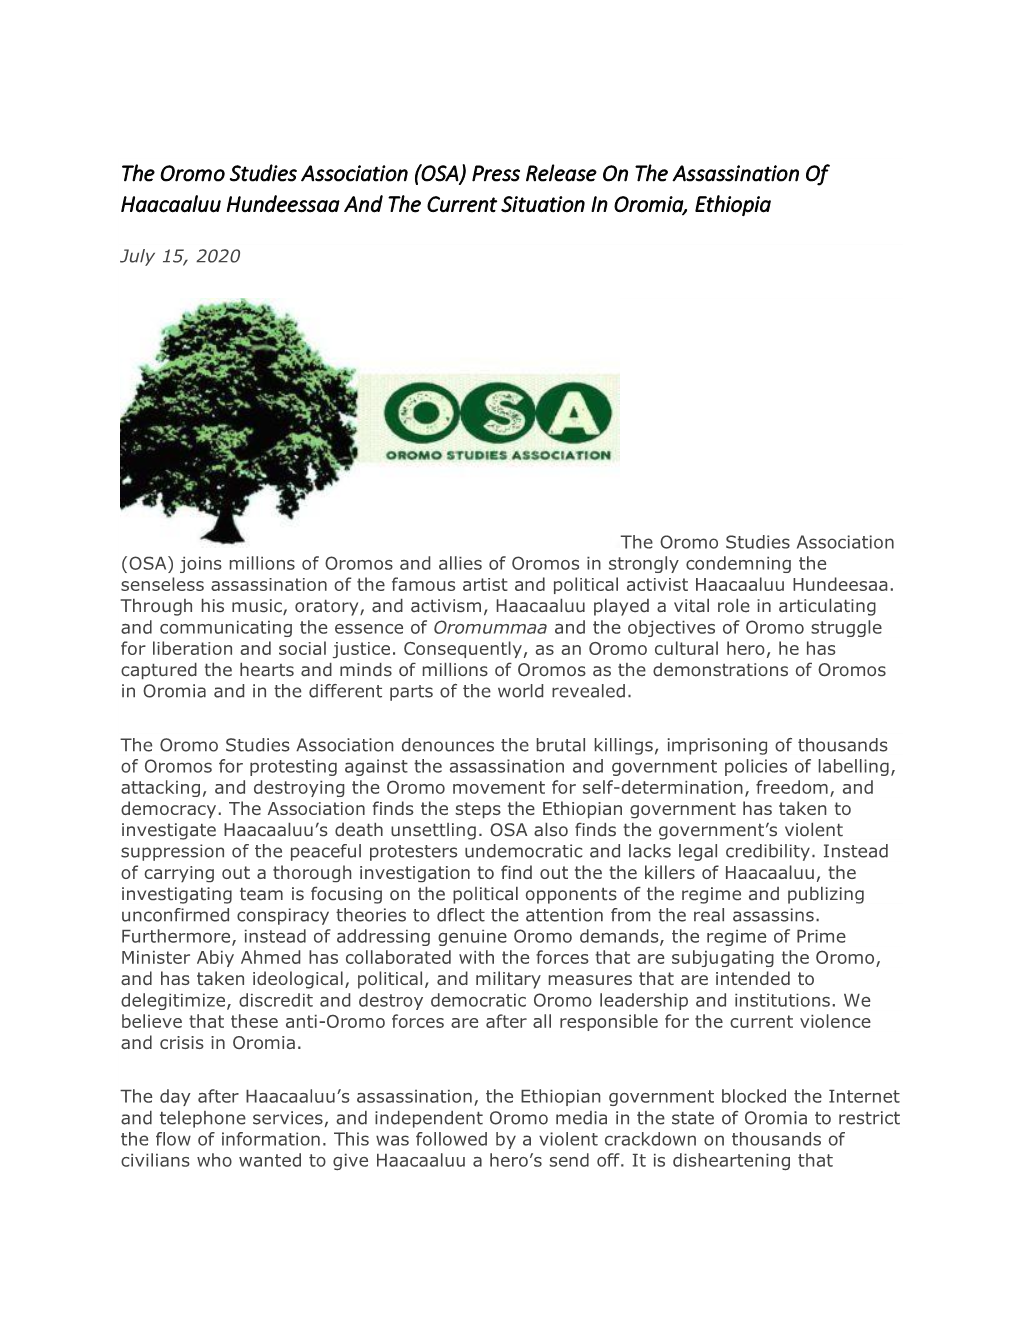 The Oromo Studies Association (OSA) Press Release on the Assassination of Haacaaluu Hundeessaa and the Current Situation in Oromia, Ethiopia